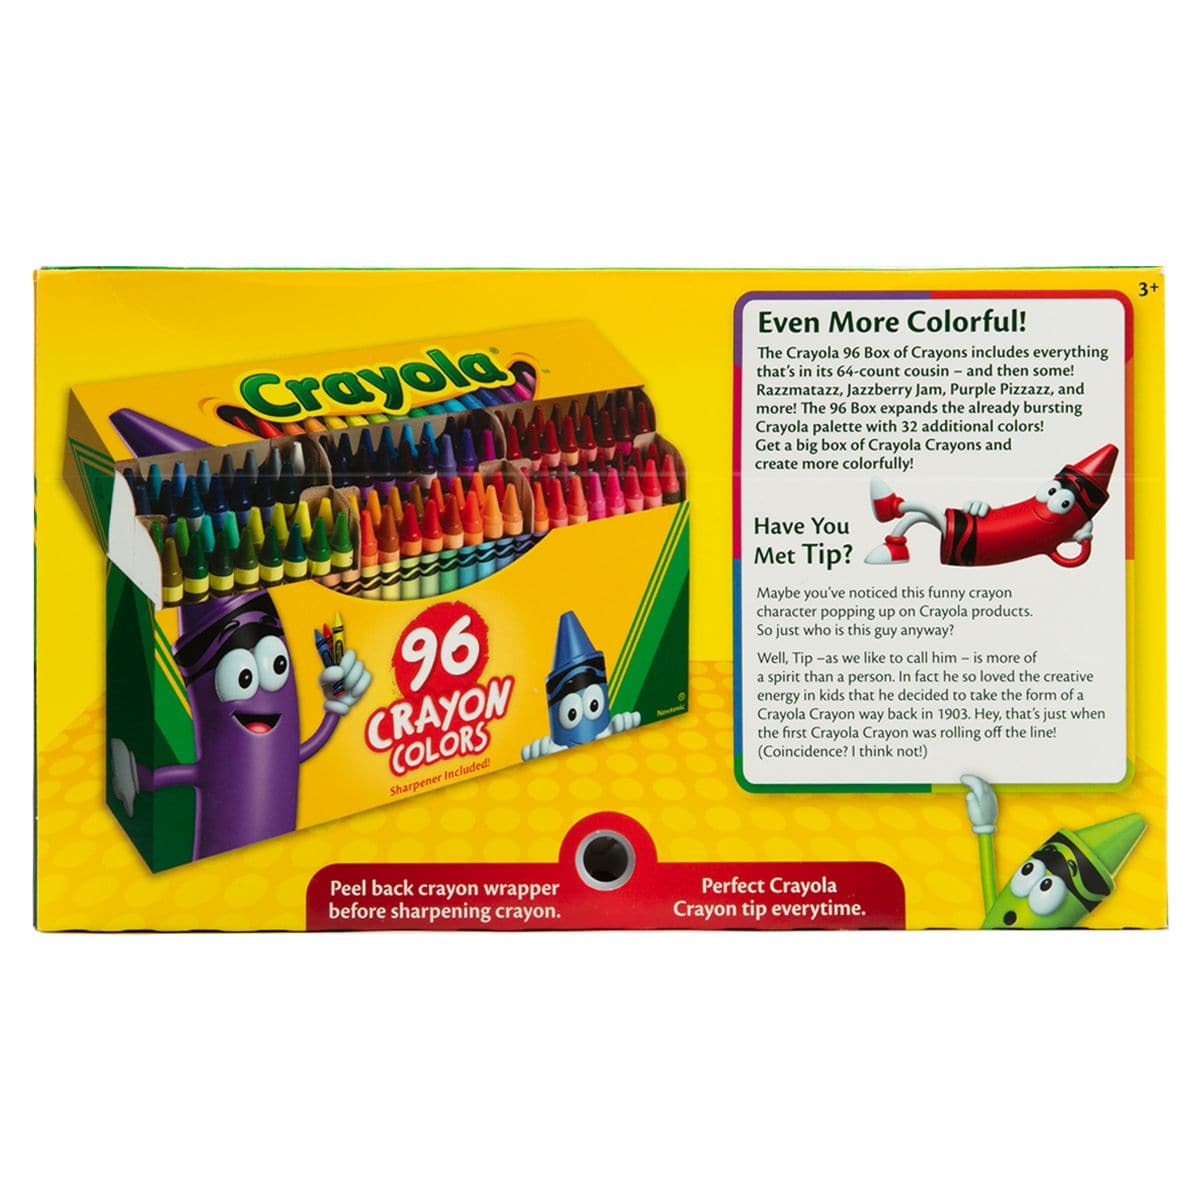 Crayola Classic Color Crayons in Flip-Top Pack with Sharpener, 96  Colors/Pack